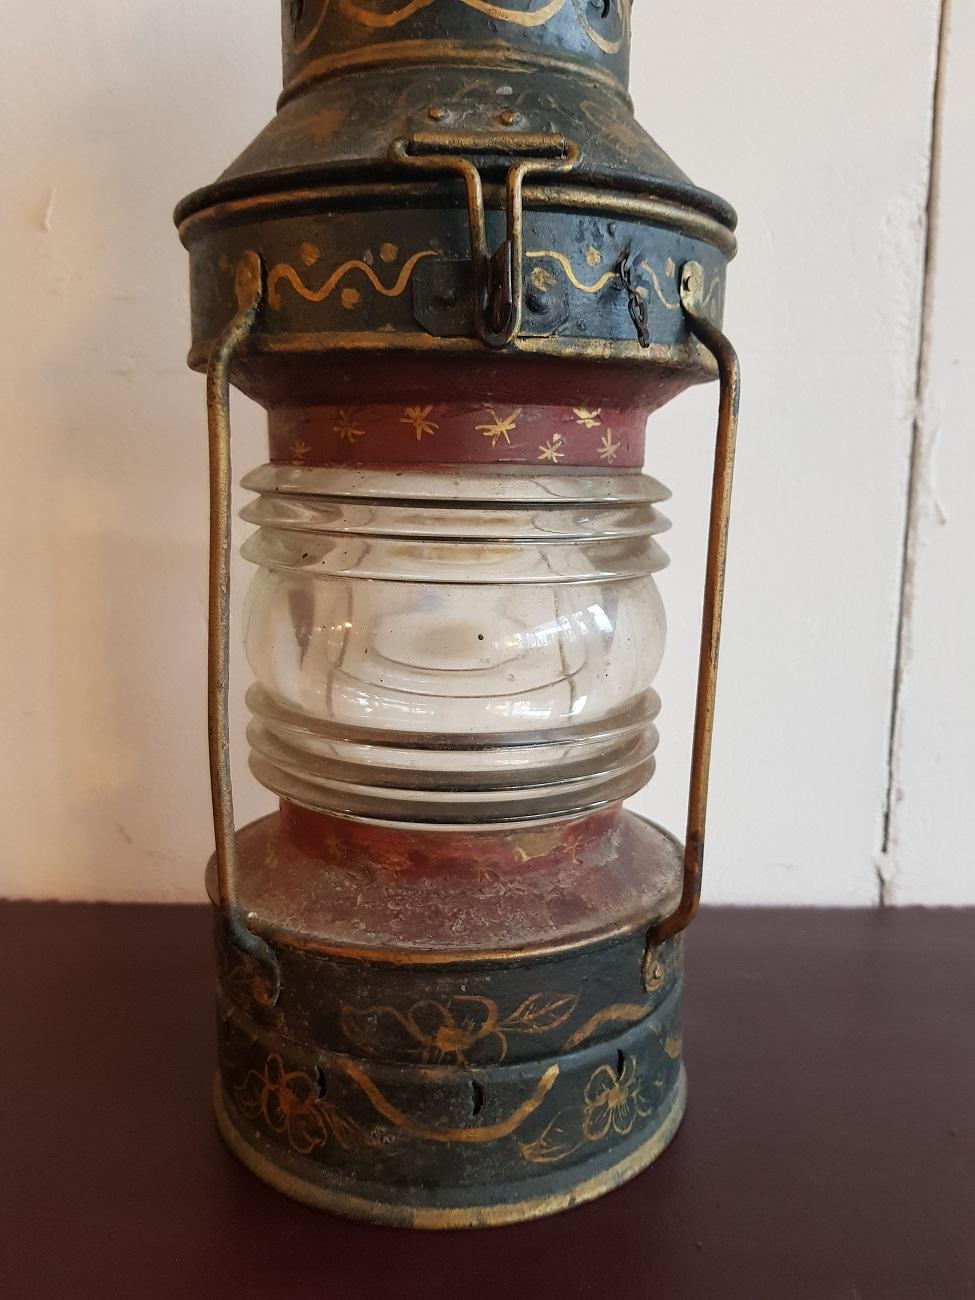 Old nostalgic hand painted anchor light with gold trim, this one is without the oil lamp and not made electrically, from circa 1900.

The measurements are:
Depth 16 cm/ 6.2 inch.
Width 16 cm/ 6.2 inch.
Height 43 cm/ 16.9 inch.